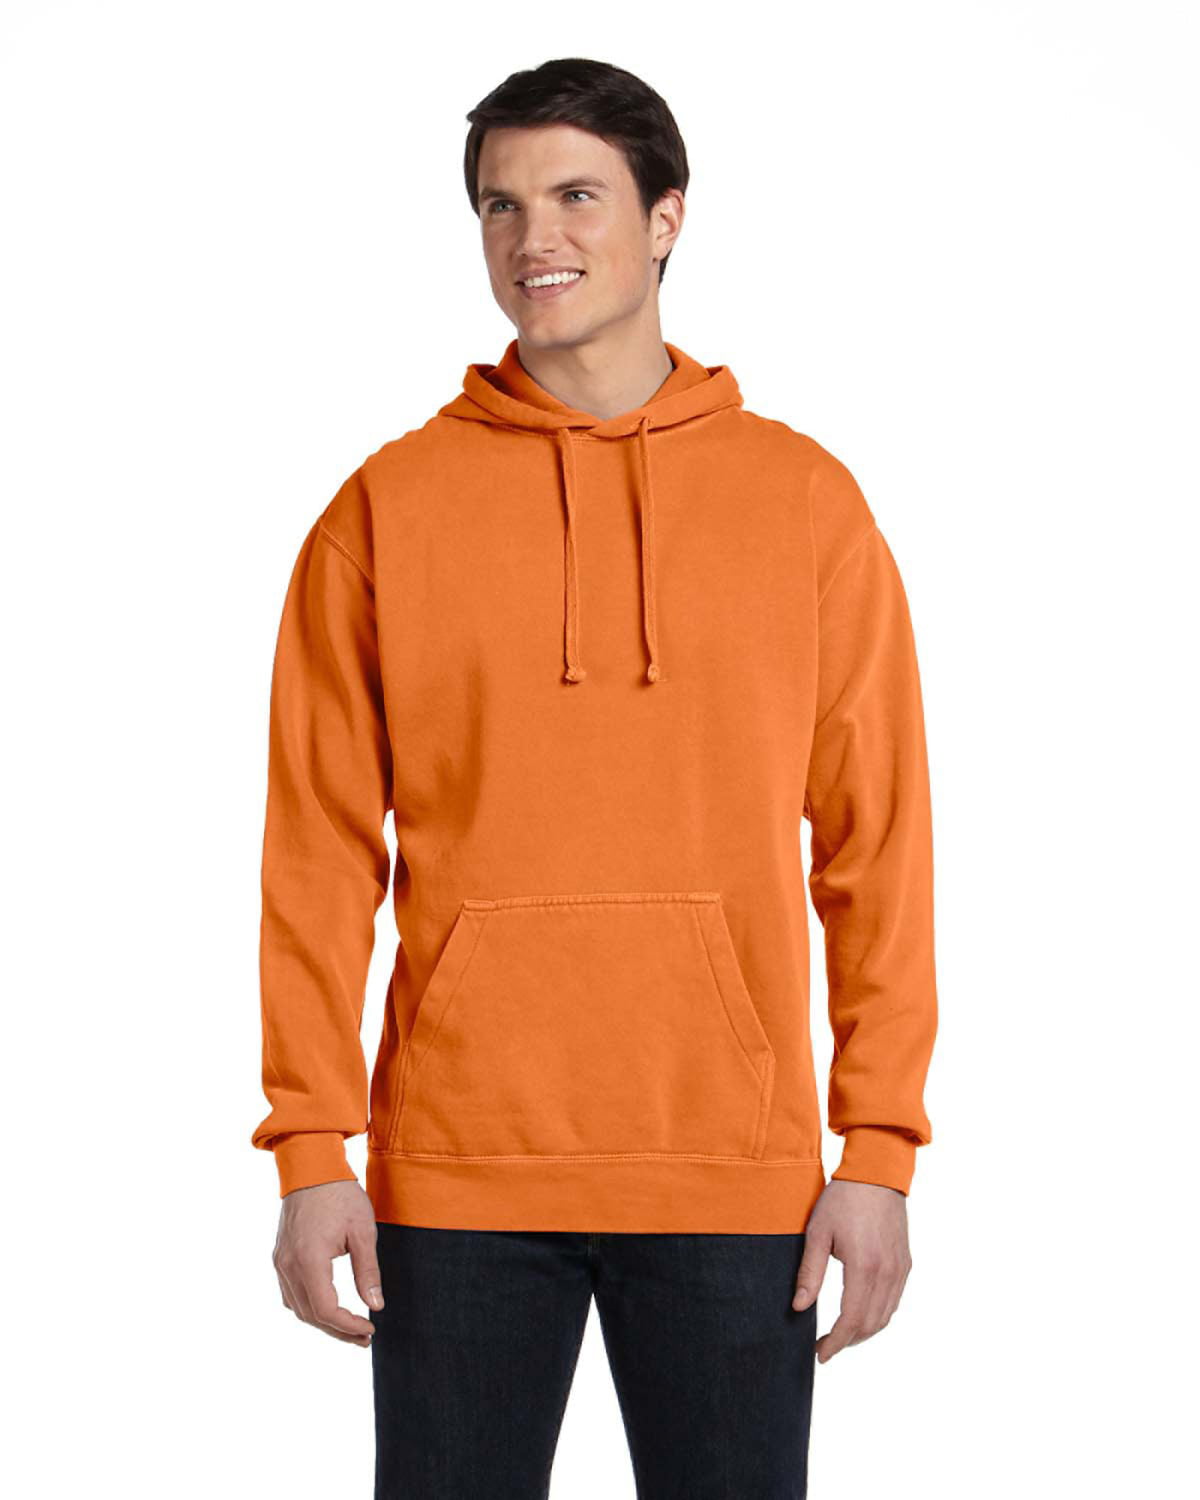 COMFORT COLORS - A Product of Comfort Colors Adult Hooded Sweatshirt ...